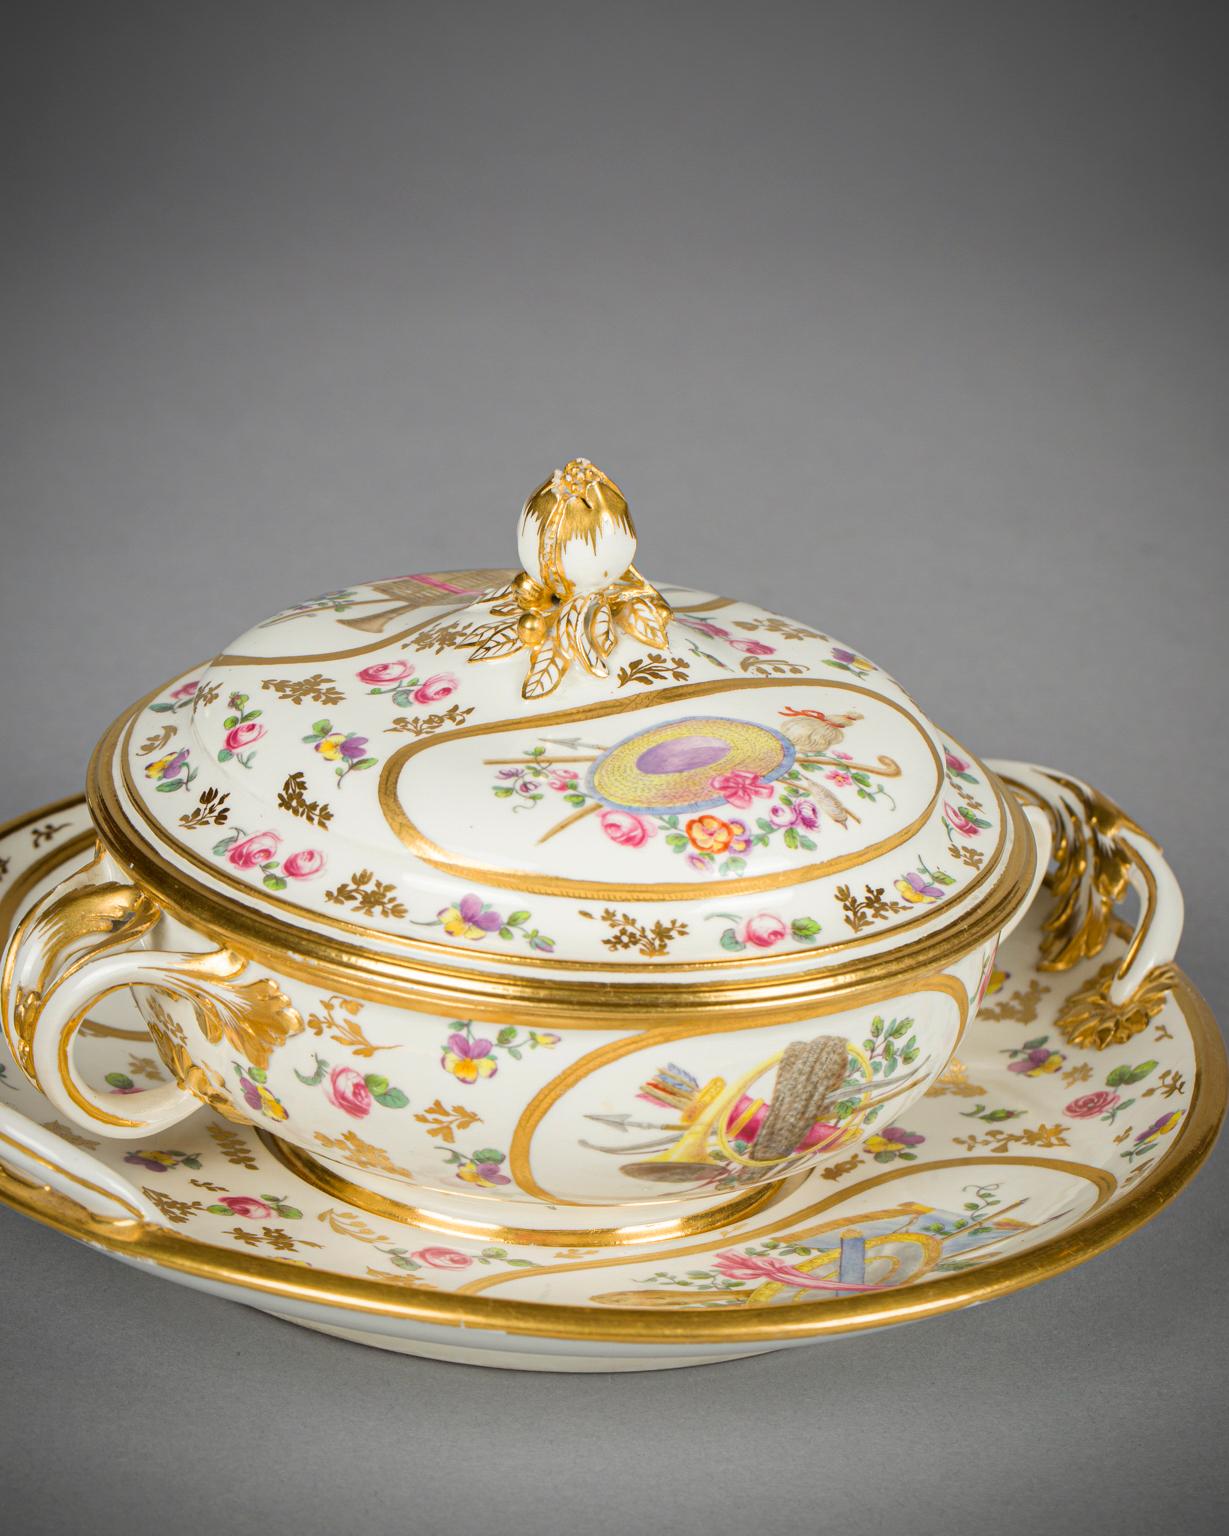 Sèvres White Glazed and Gilt Porcelain Écuelle, Cover and Underplate, circa 1775 For Sale 3